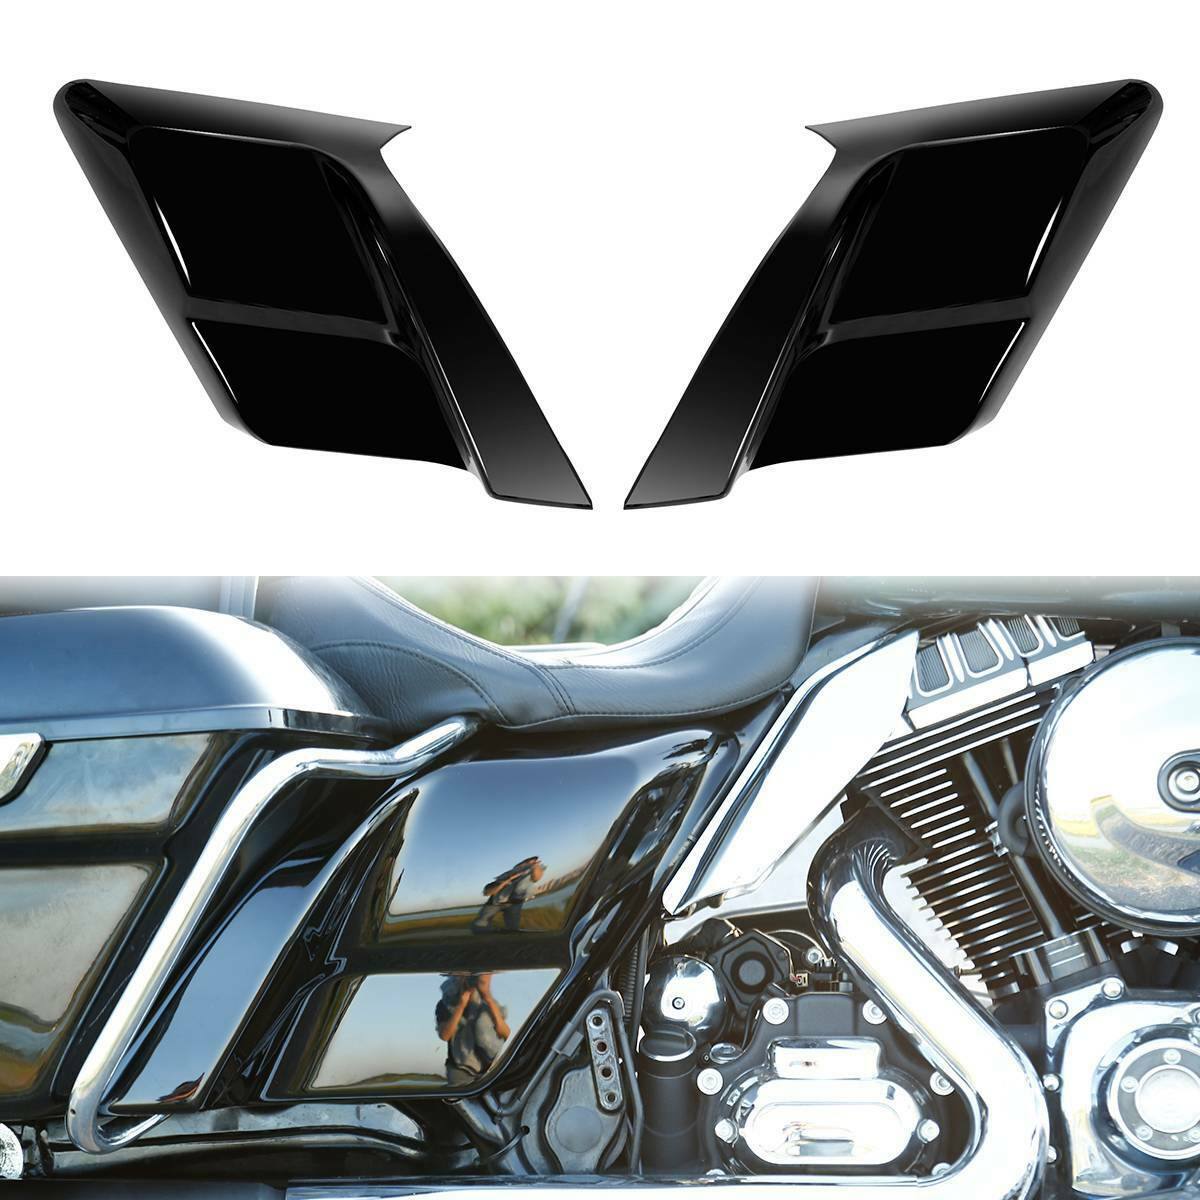 Stretched Side Cover Panel Fit For Harley Touring Road Street Glide 2014-2022 19 - Moto Life Products